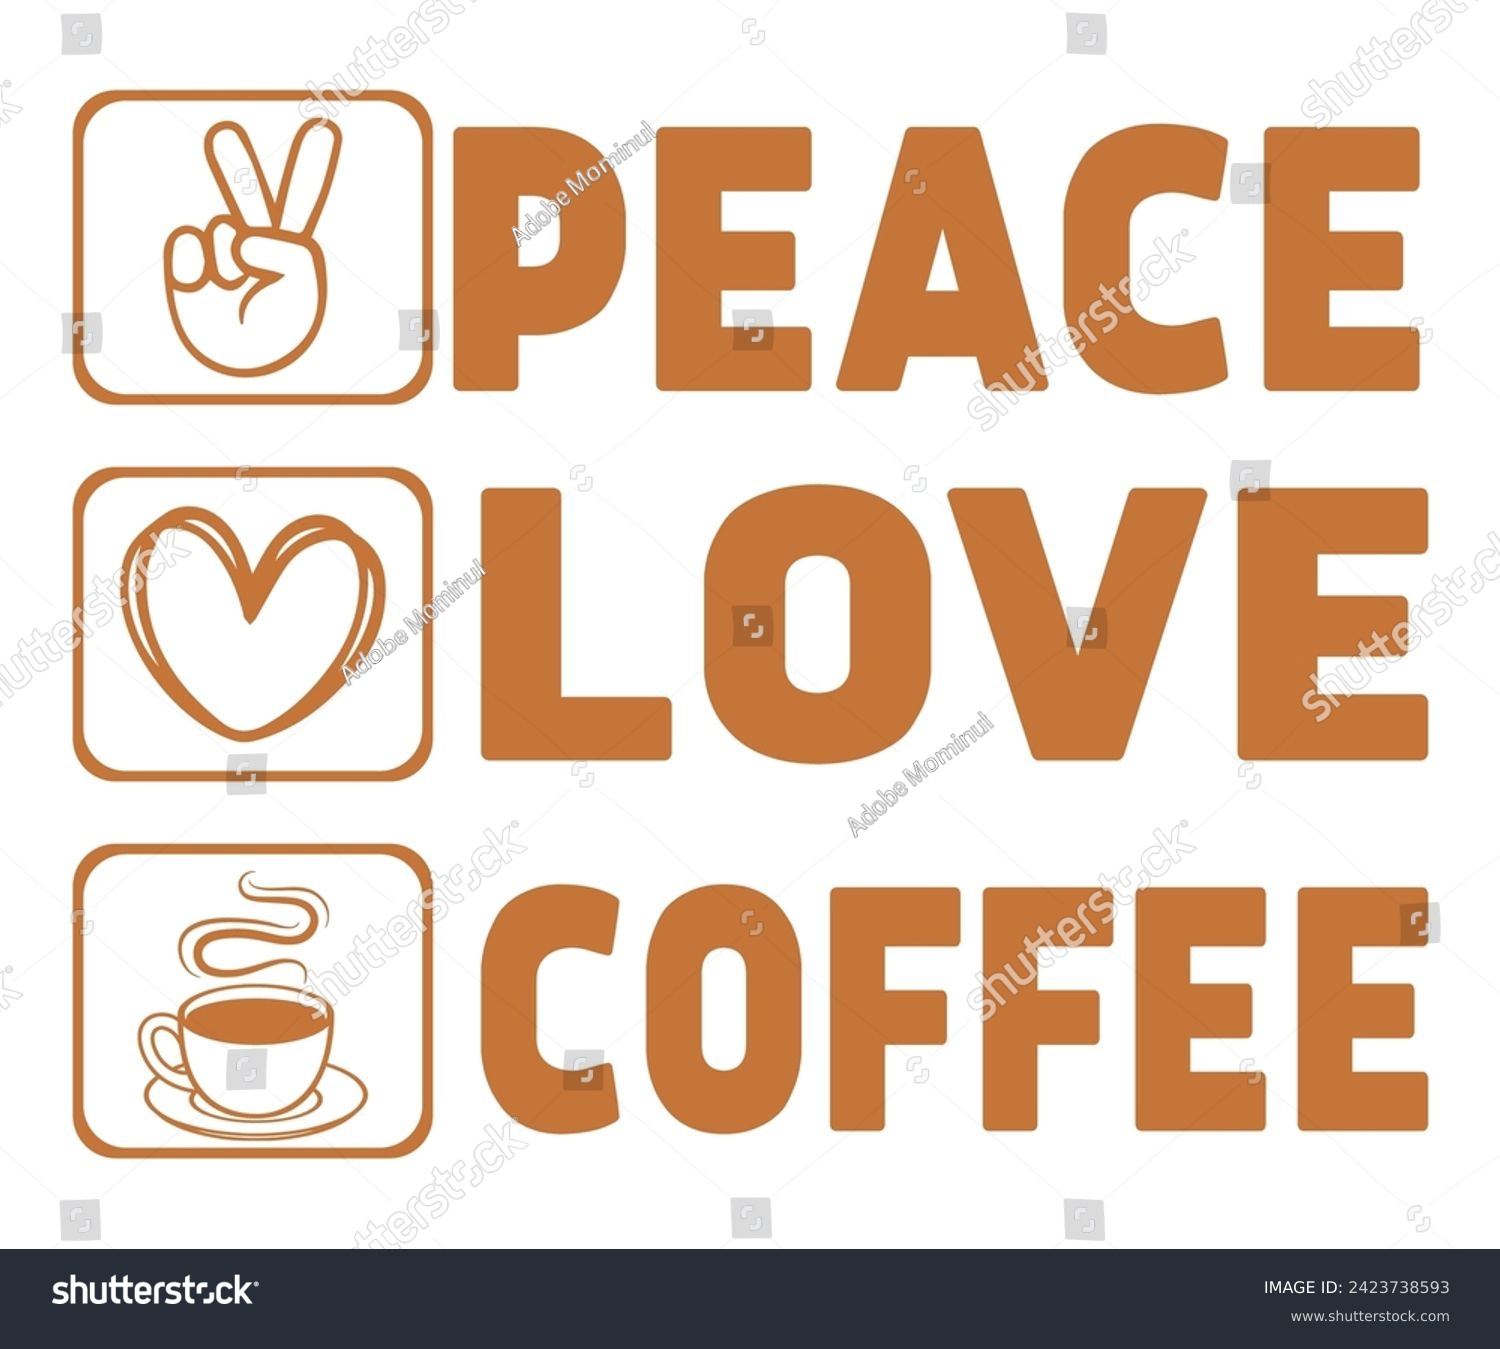 SVG of Peace Love Coffee Svg,Coffee Retro,Funny Coffee Sayings,Coffee Mug Svg,Coffee Cup Svg,Gift For Coffee,Coffee Lover,Caffeine Svg,Svg Cut File,Coffee Quotes,Sublimation Design, svg